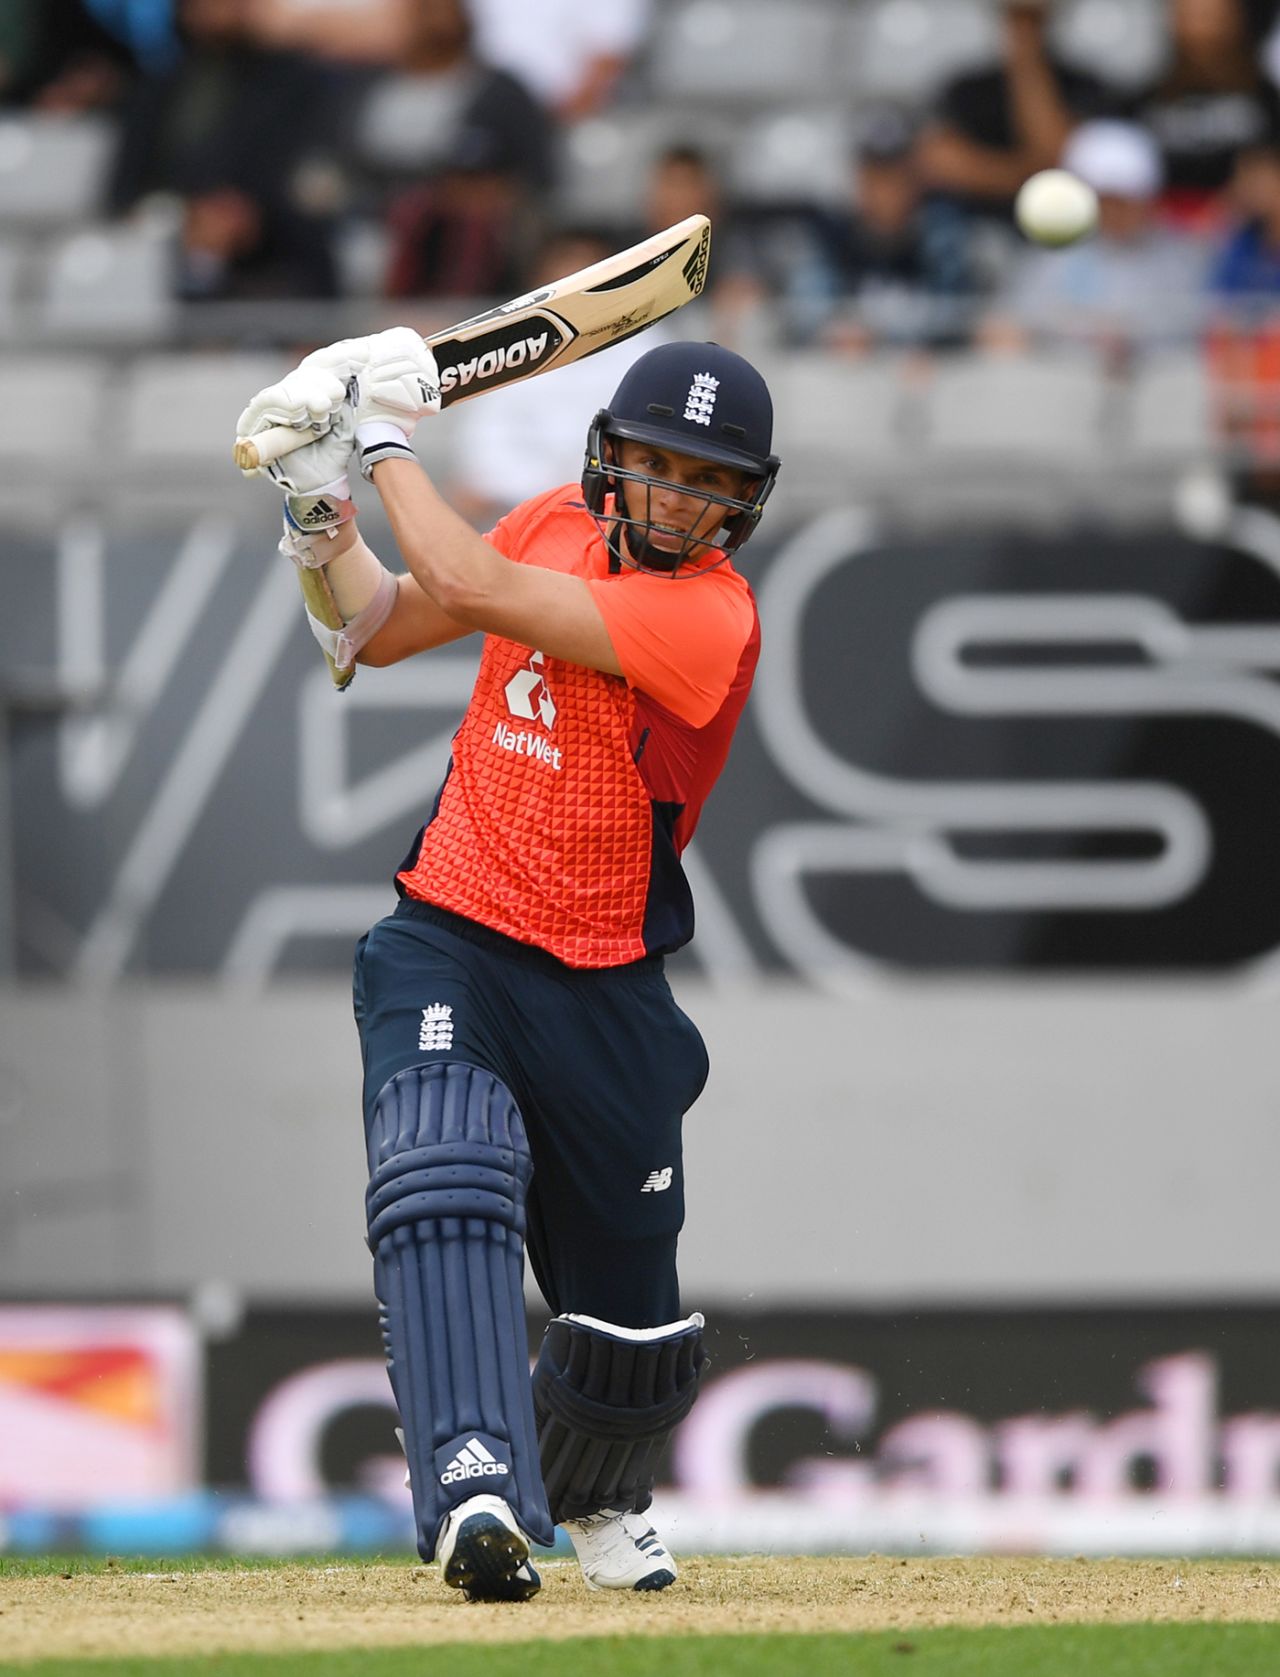 Sam Curran belts one in the air, New Zealand v England, 5th T20I, Auckland, November 10, 2019